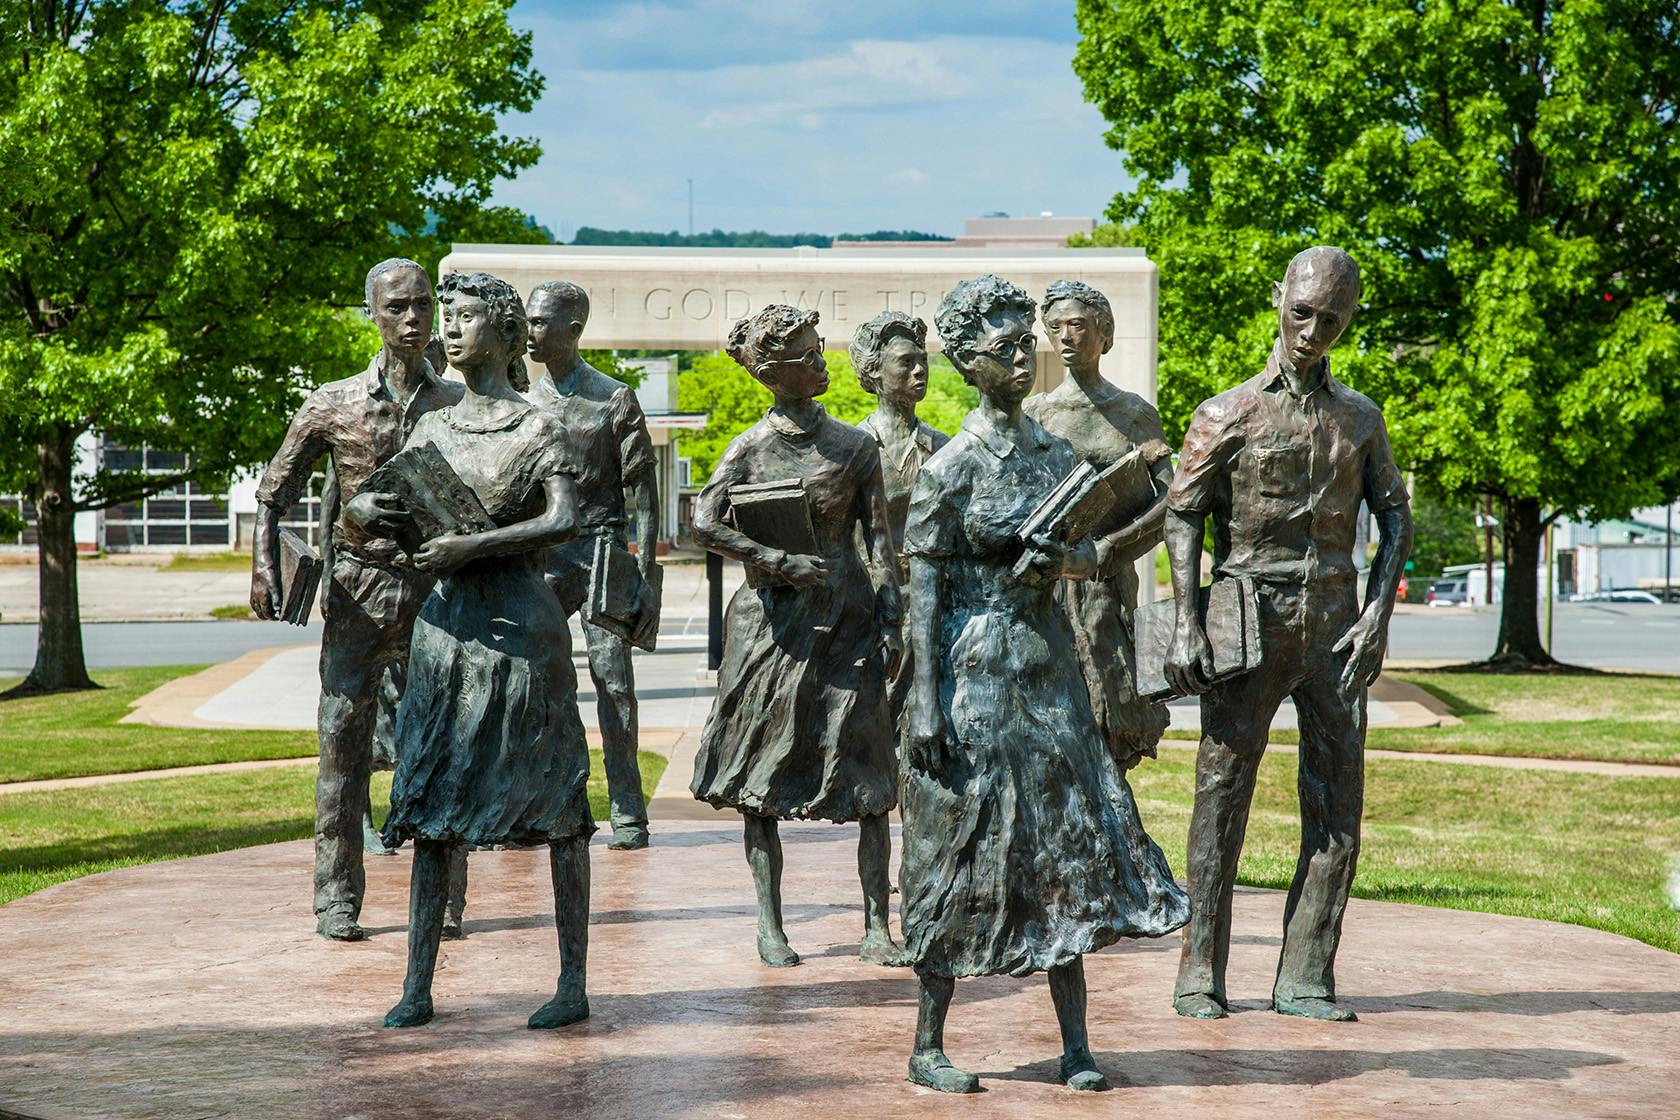 <p>“Testament: The Little Rock Nine Monument” honors the courage of the nine African American students who began the process of desegregating Little Rock’s public schools in 1957. Located on the grounds of the Arkansas State Capitol, the memorial features bronze sculptures of the nine students, along with plaques bearing quotations from each of them. (Photo courtesy of Arkansas Department of Parks, Heritage and Tourism)<br/><br/></p>